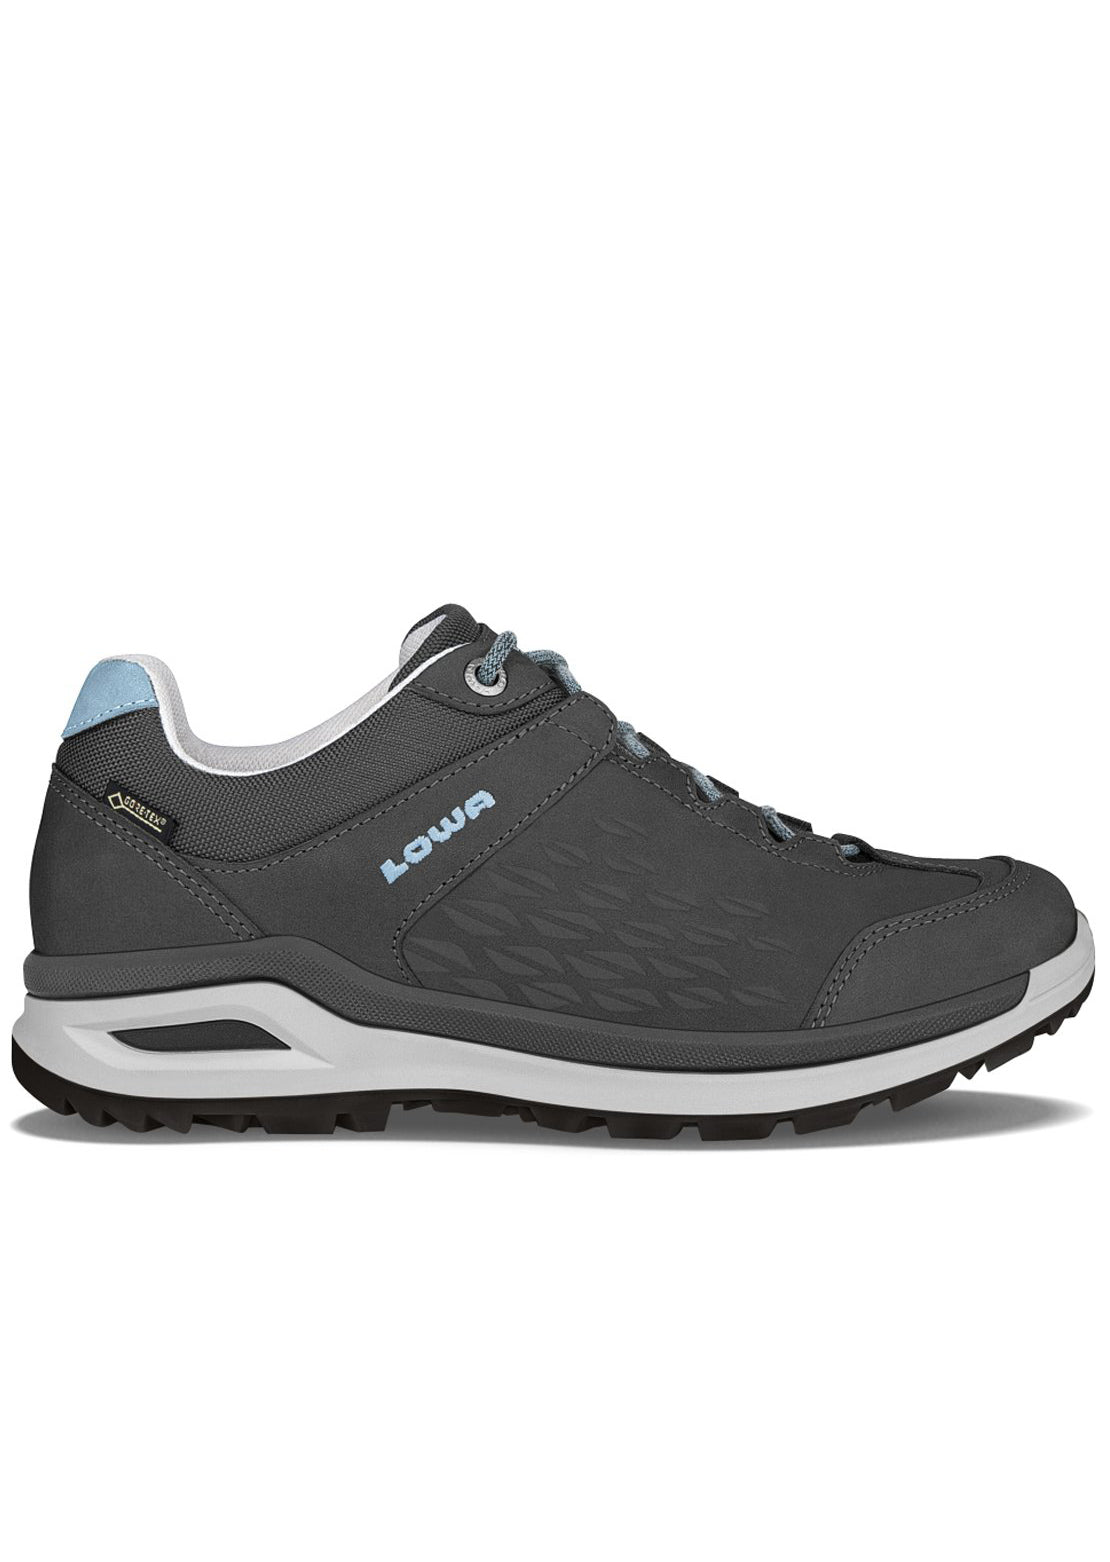 Lowa Women’s Locarno GTX Lo Shoes Anthracite/Turquoise